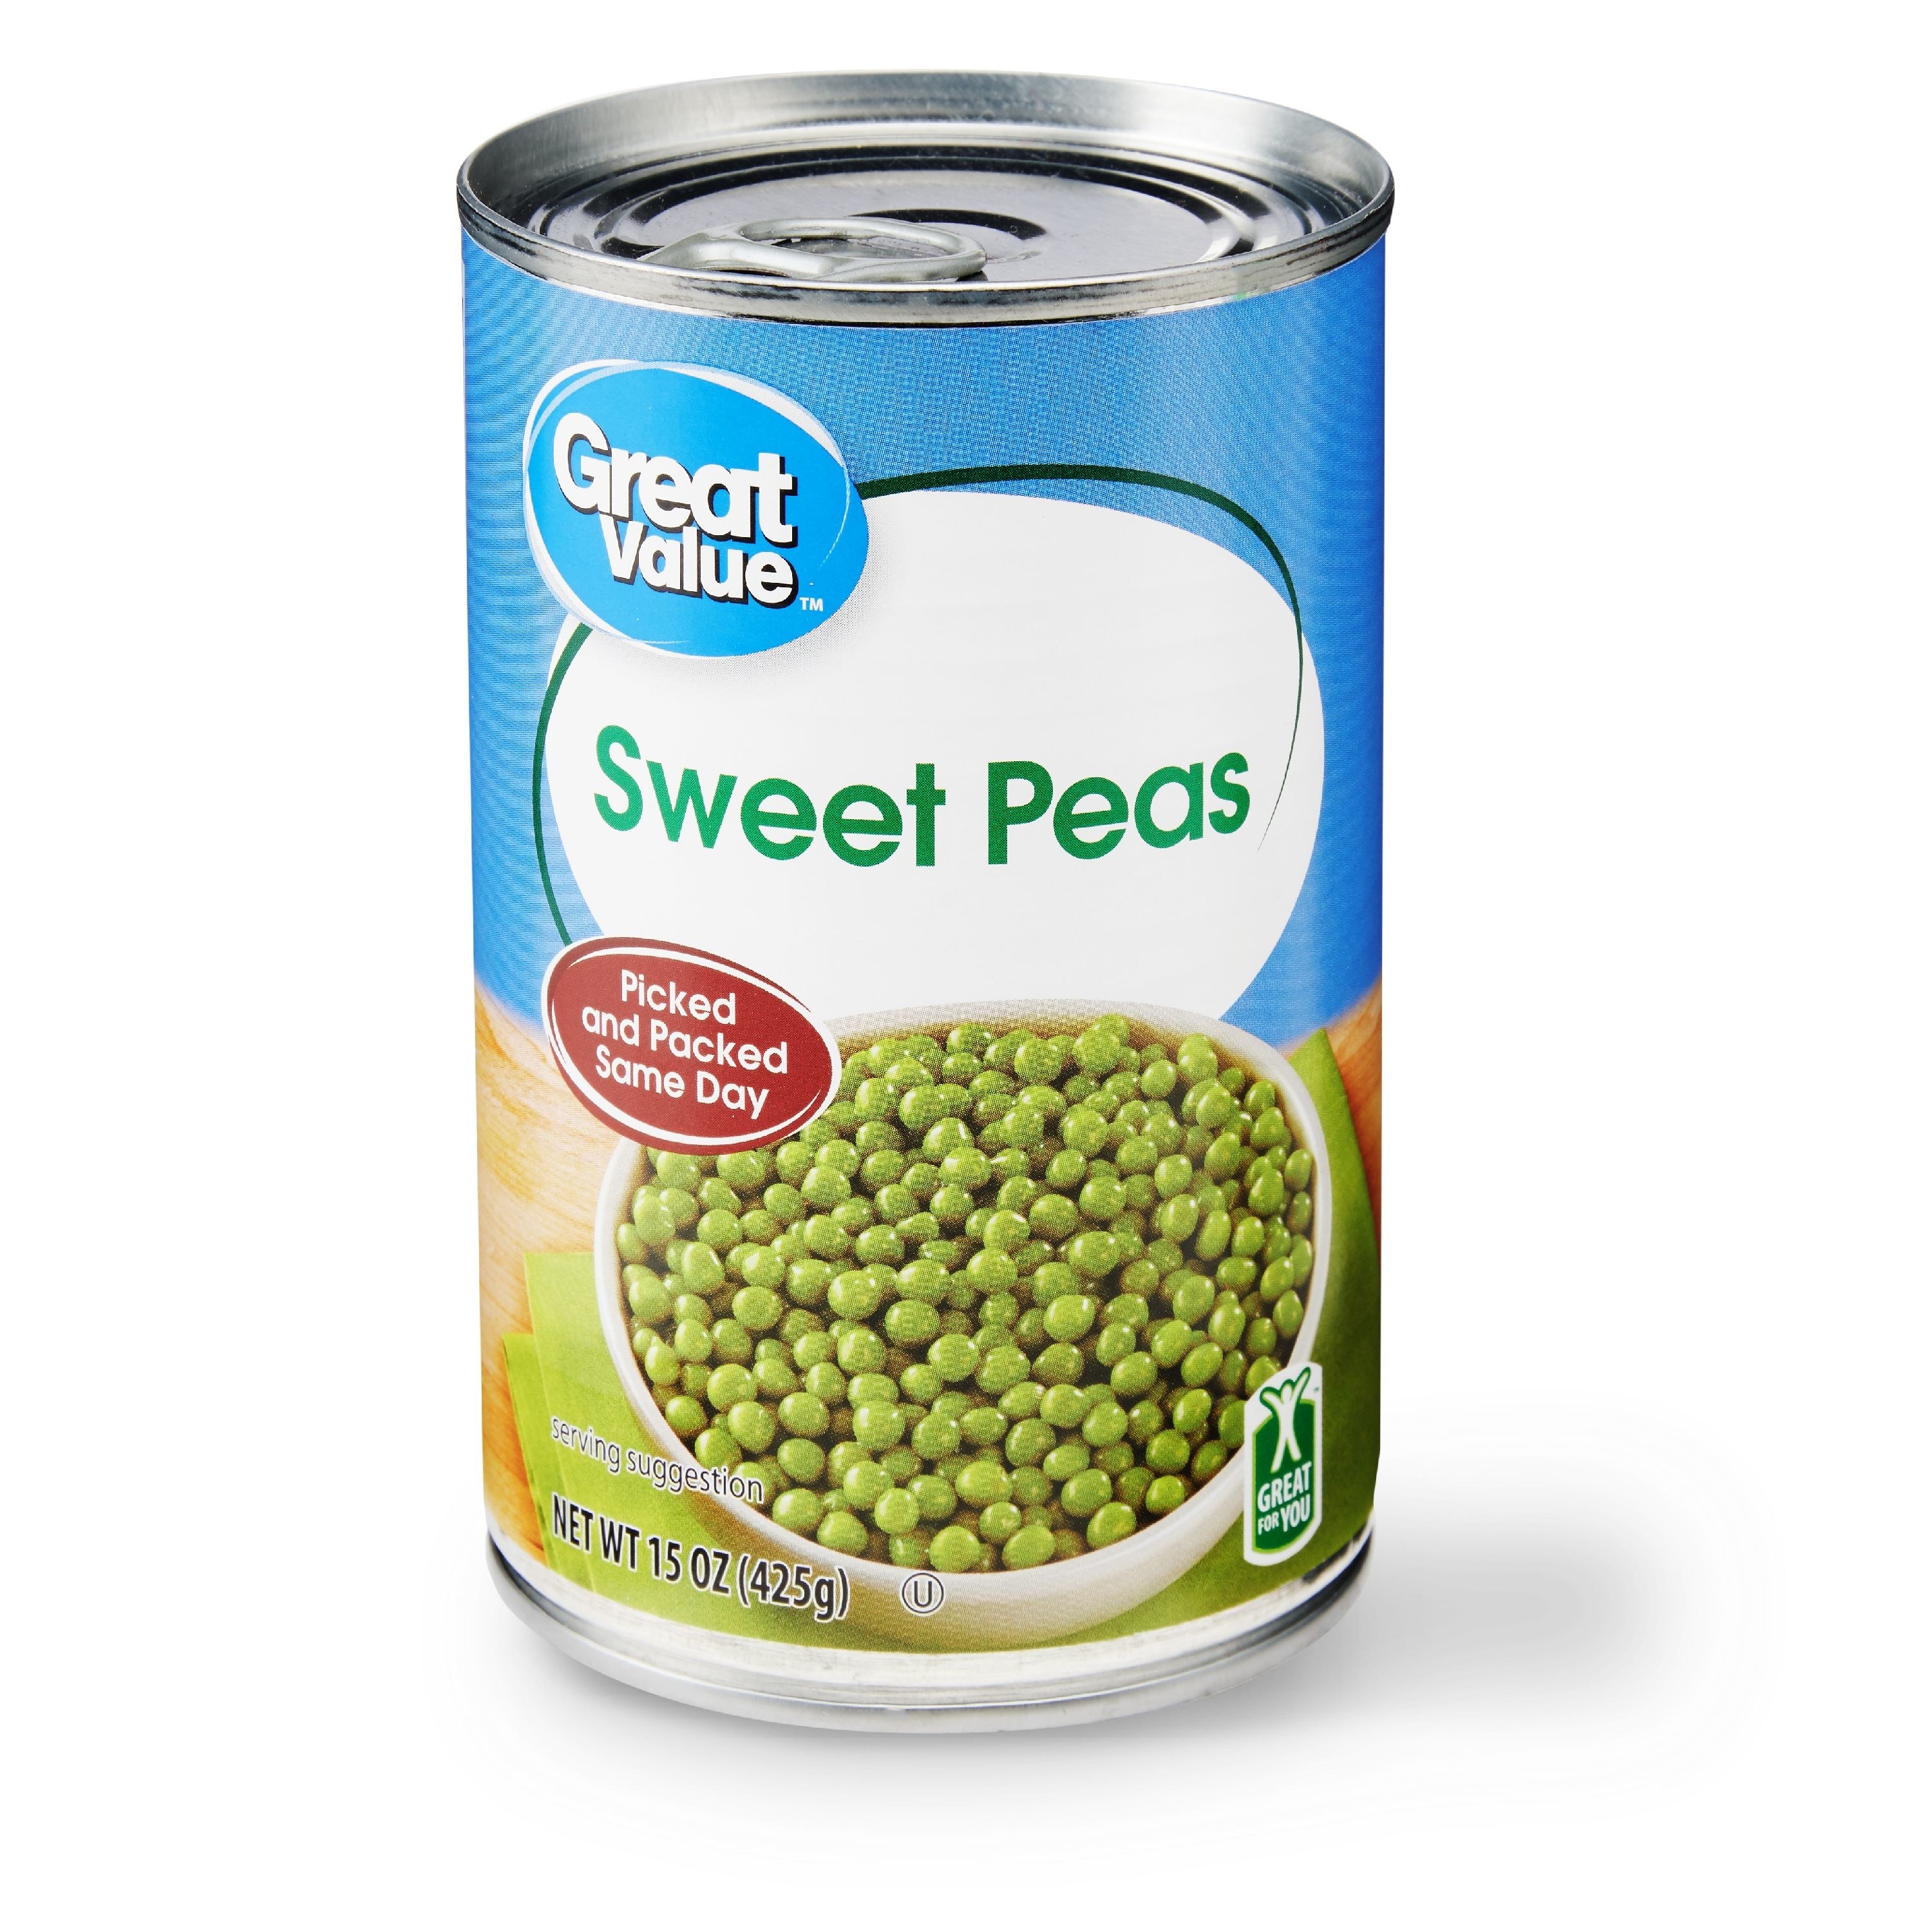 the can of peas